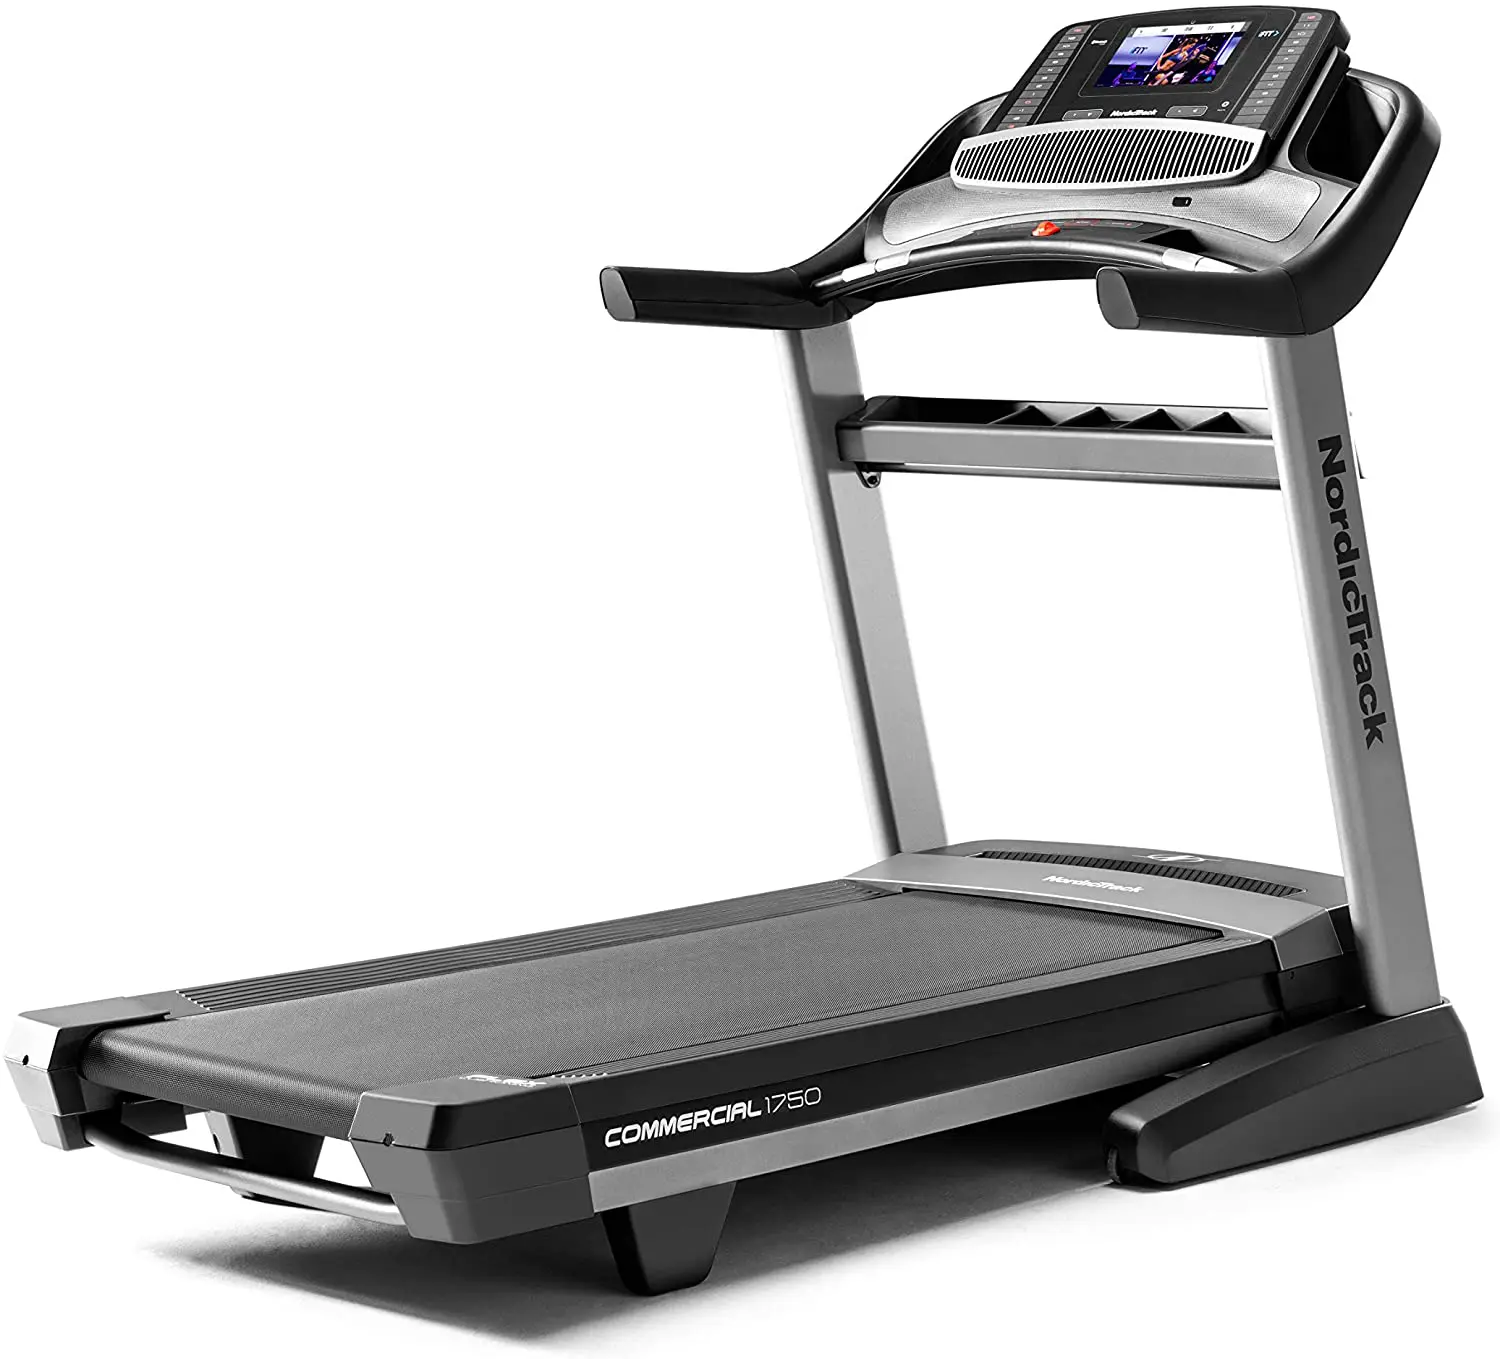 Best-treadmill-2021-Nordic-Track-Commercial-1750